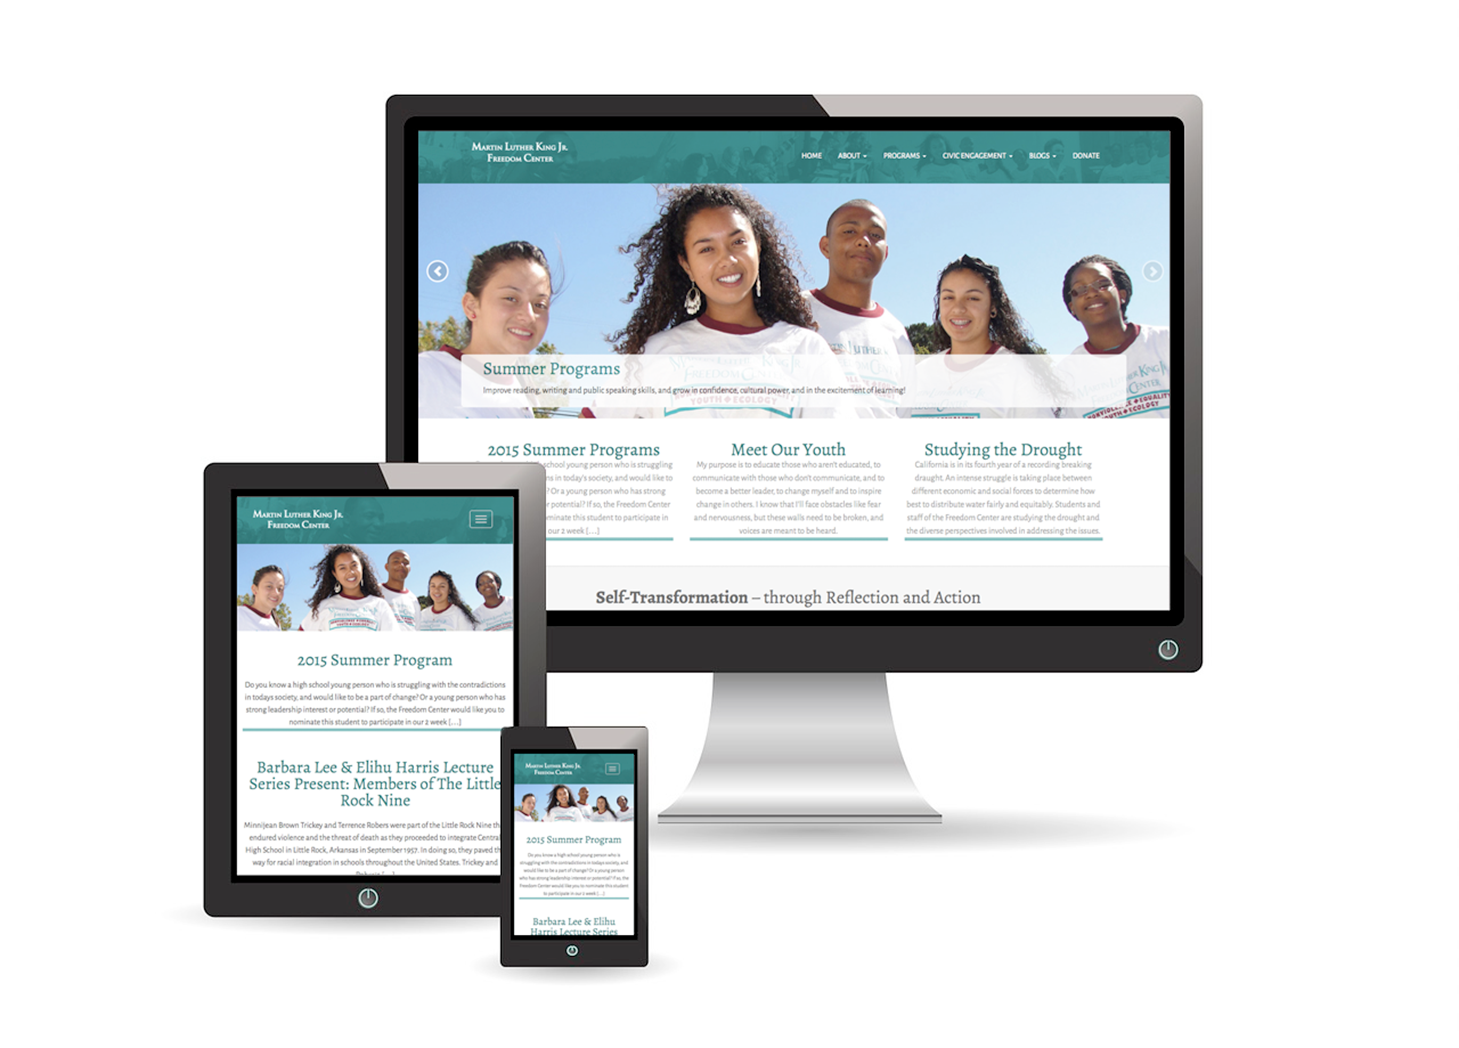 Web design and implementation for the Martin Luther King Jr. Freedom Center, an Oakland-based youth empowerment nonprofit.